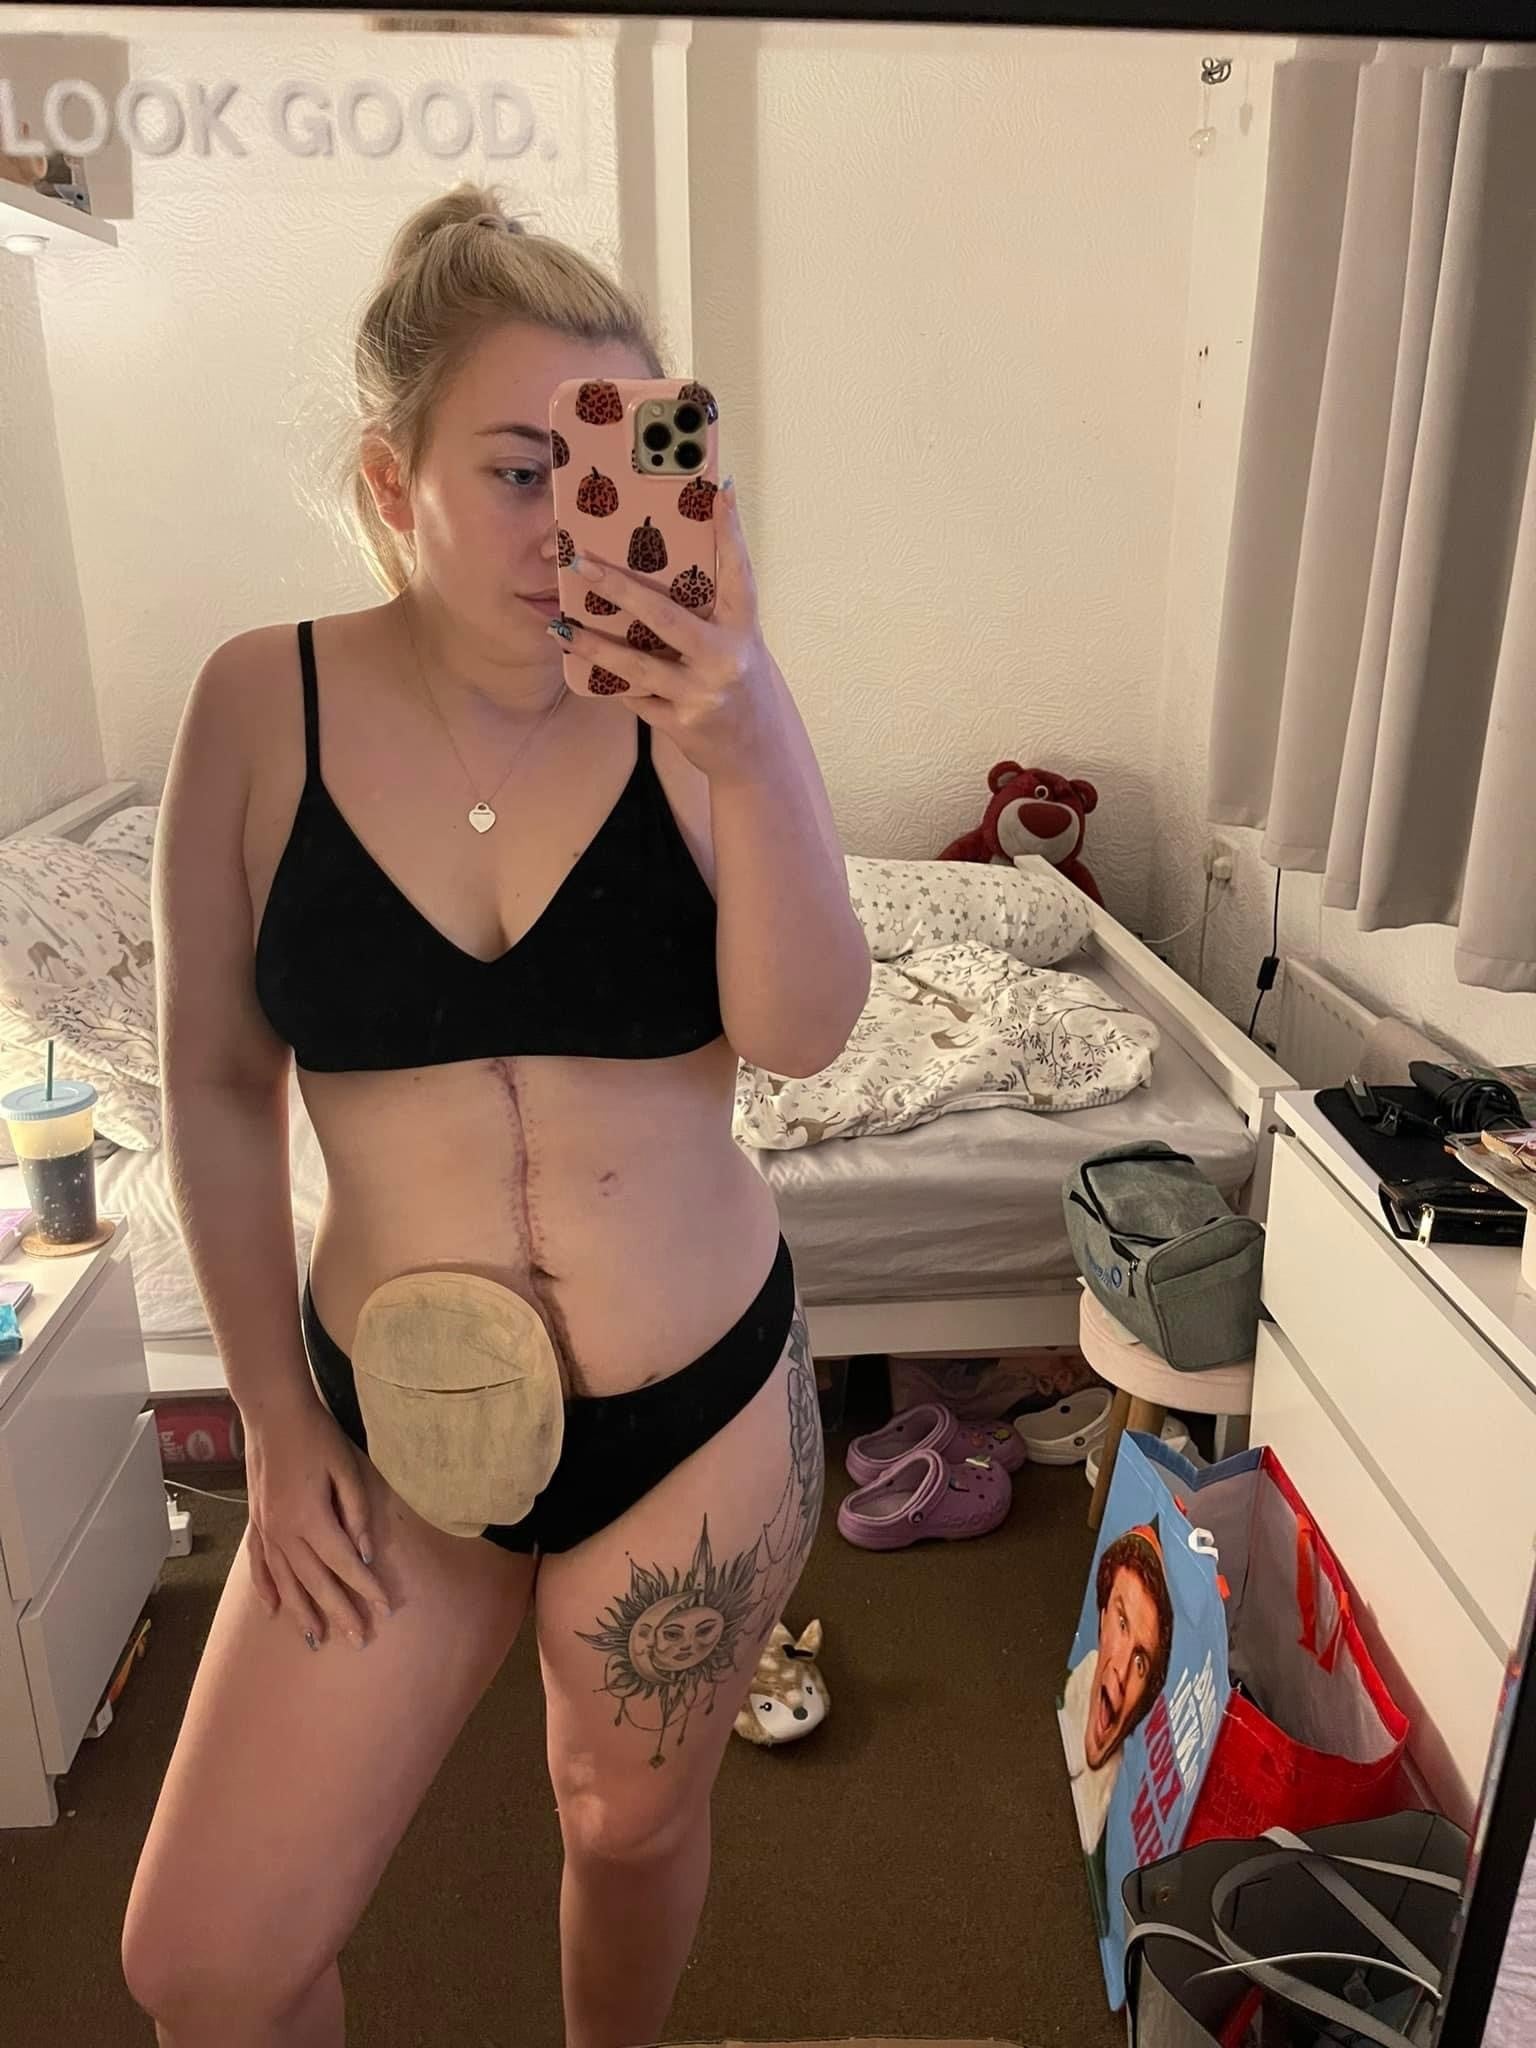 Emma had a temporary stoma while undergoing treatment